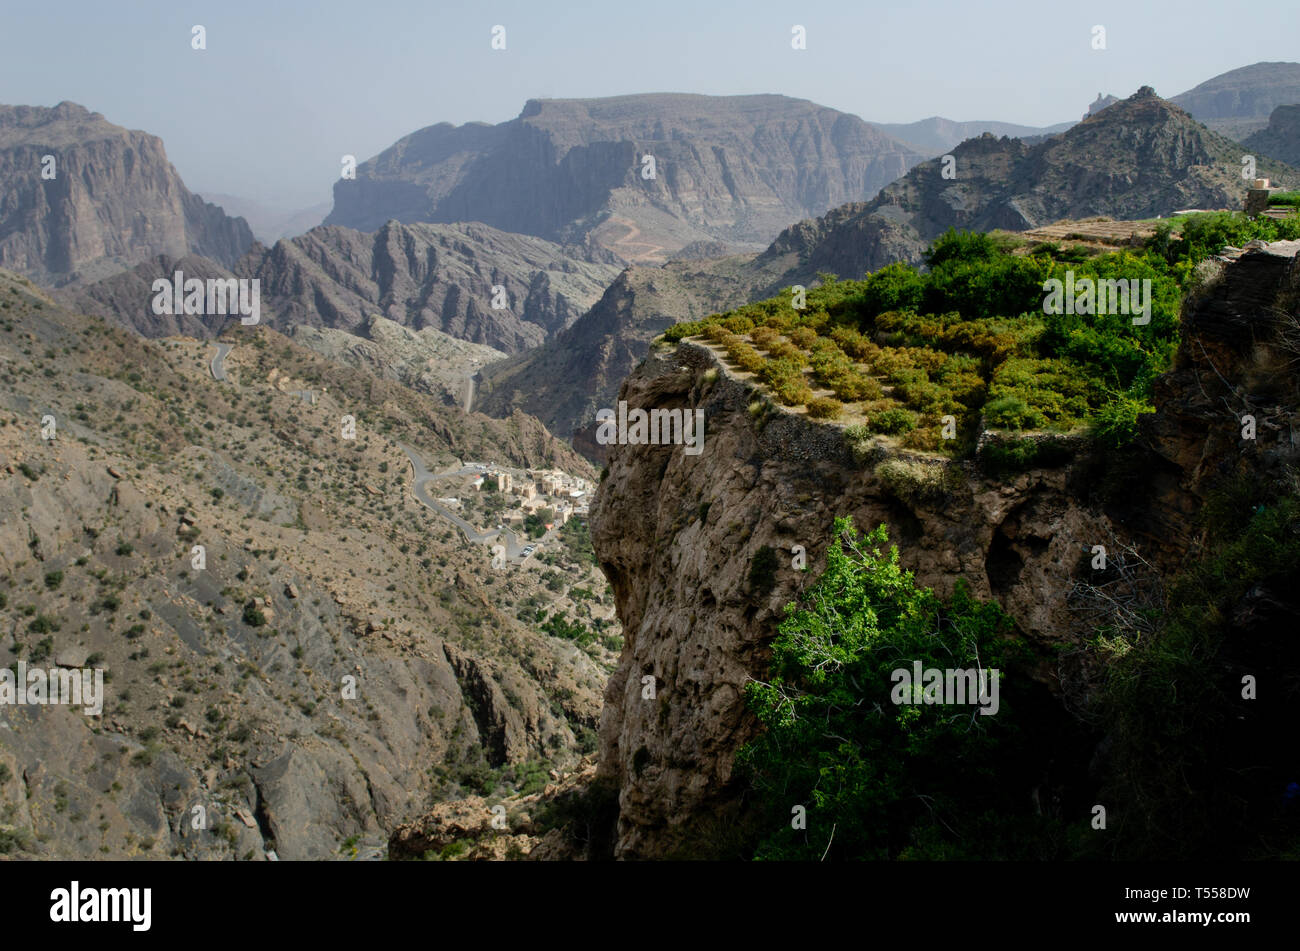 The green mountains called Jebel Akhdar of the Hajar mountain range, the harsh interior of Oman, home of traditional rose harvesting and fruit farming Stock Photo